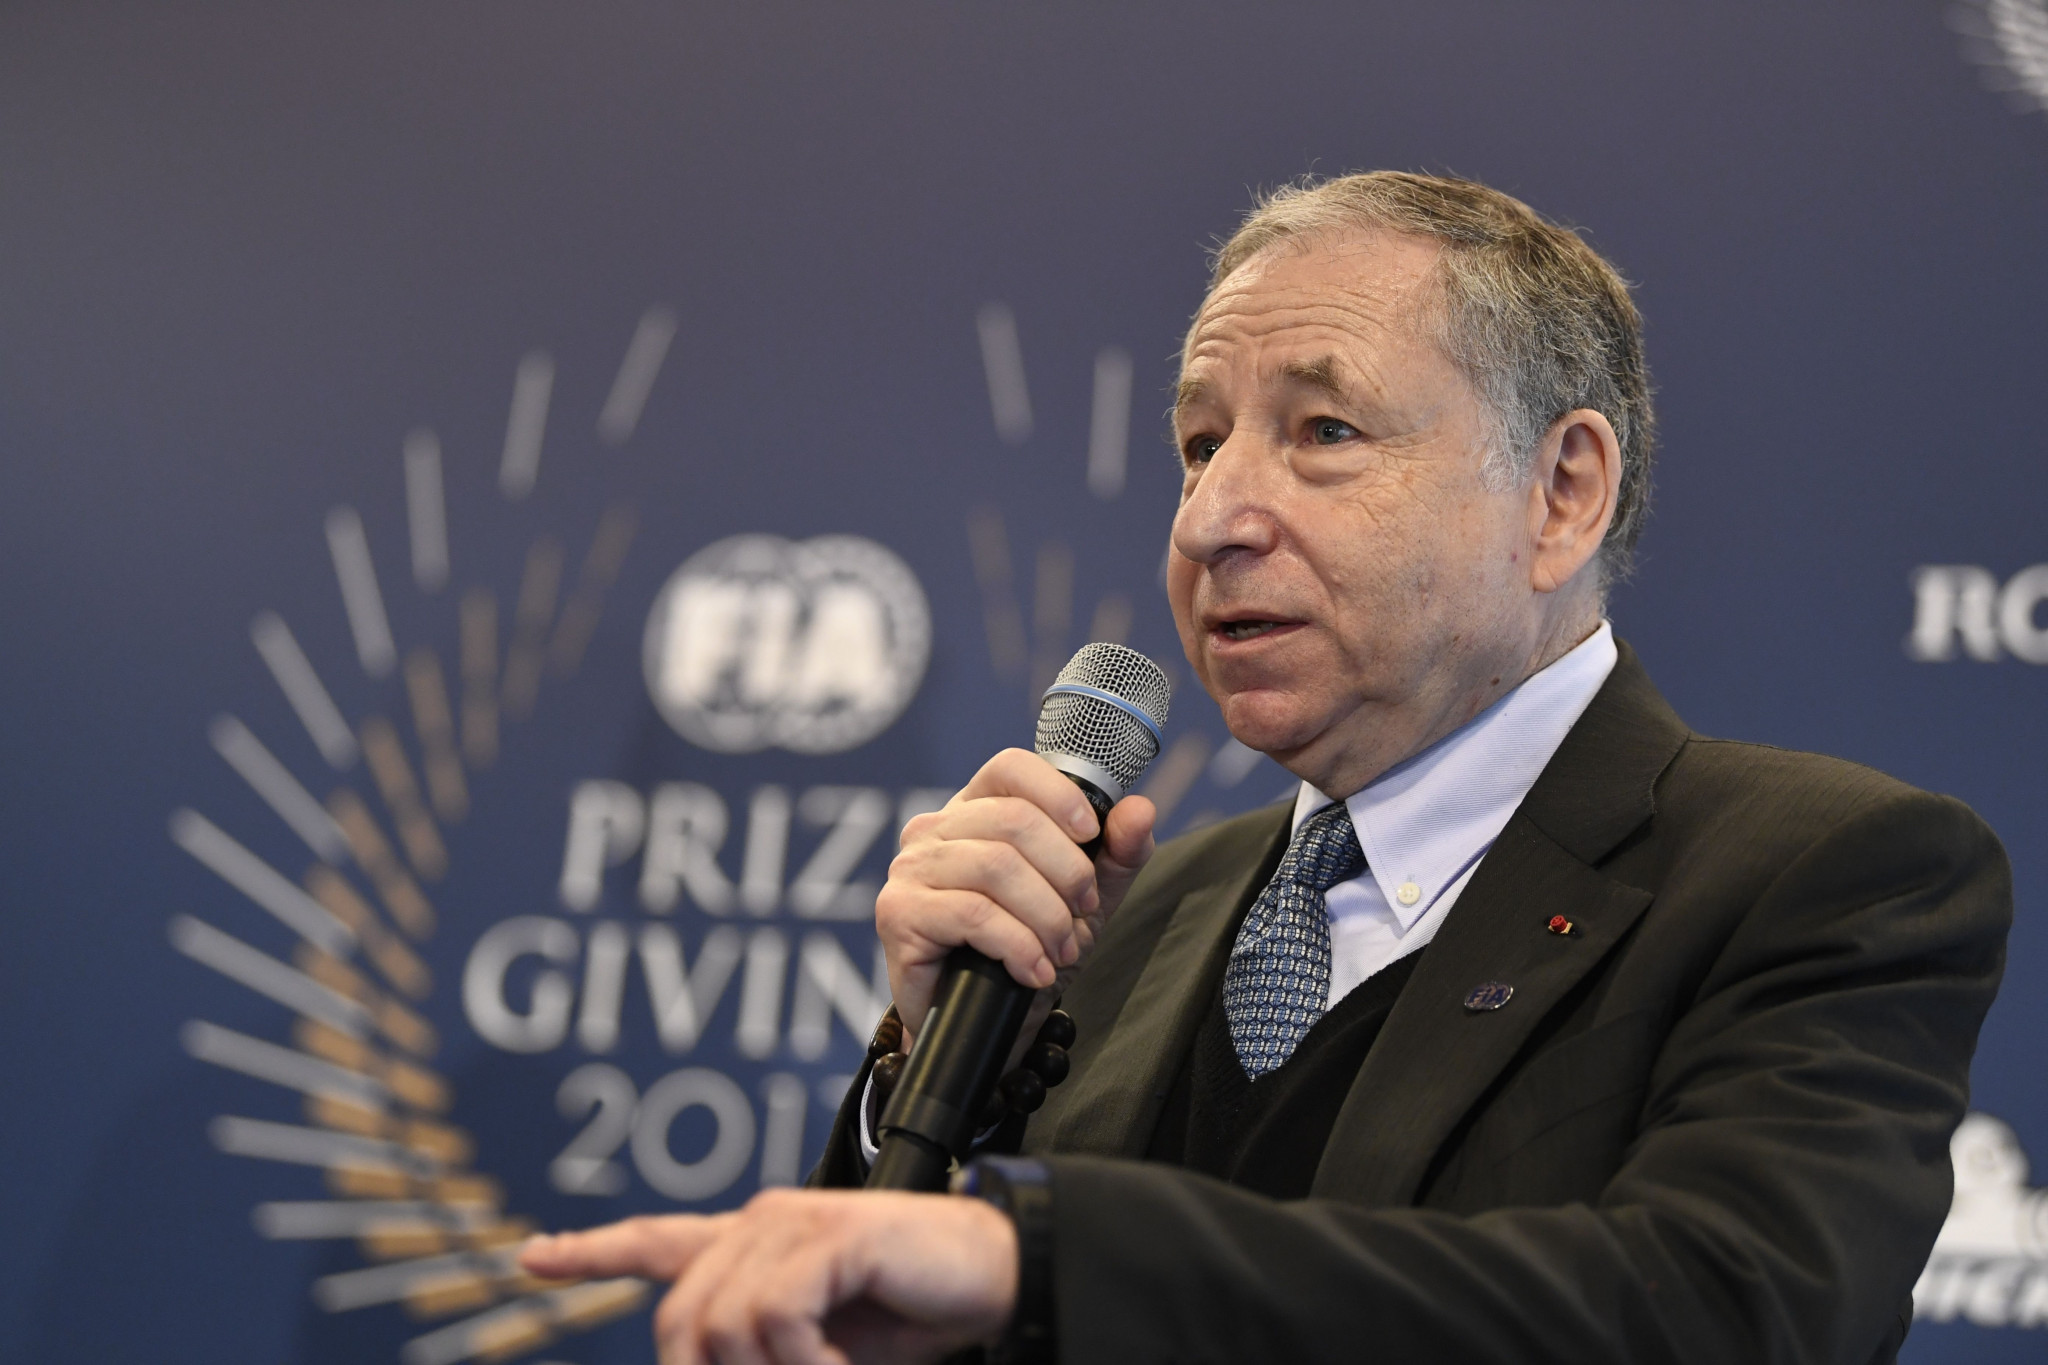 Todt re-elected International Automobile Federation President